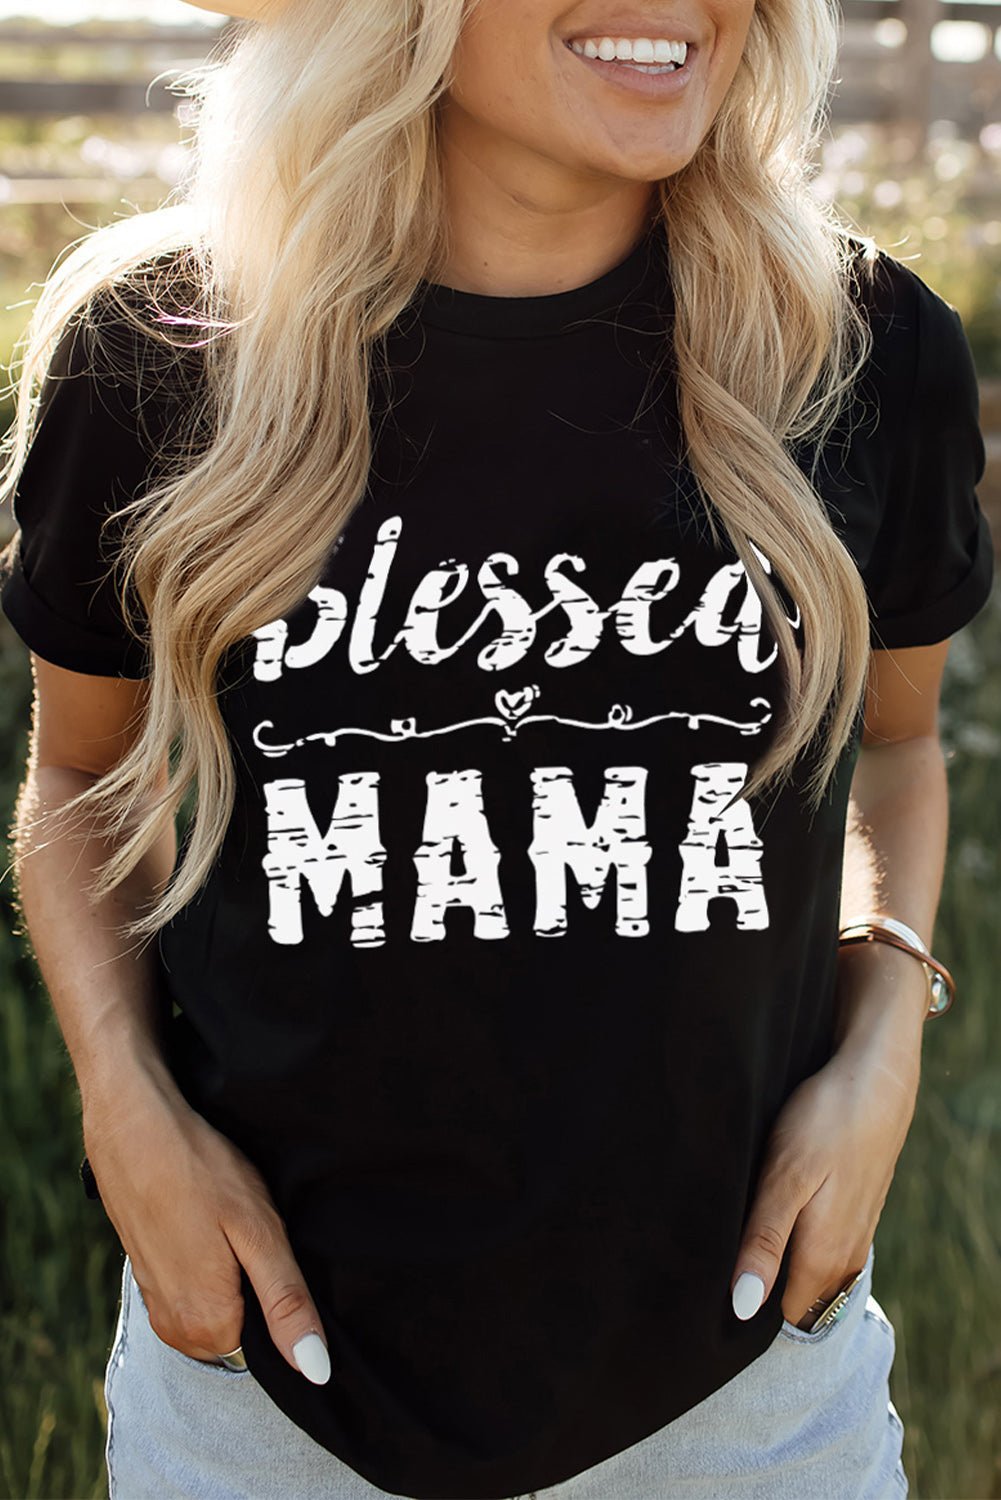 "BLESSED MAMA Graphic Tee - Celebrate Motherhood with Style and Comfort - Embrace the Joys of Parenthood in a Serene Countryside-inspired Tee" - Guy Christopher